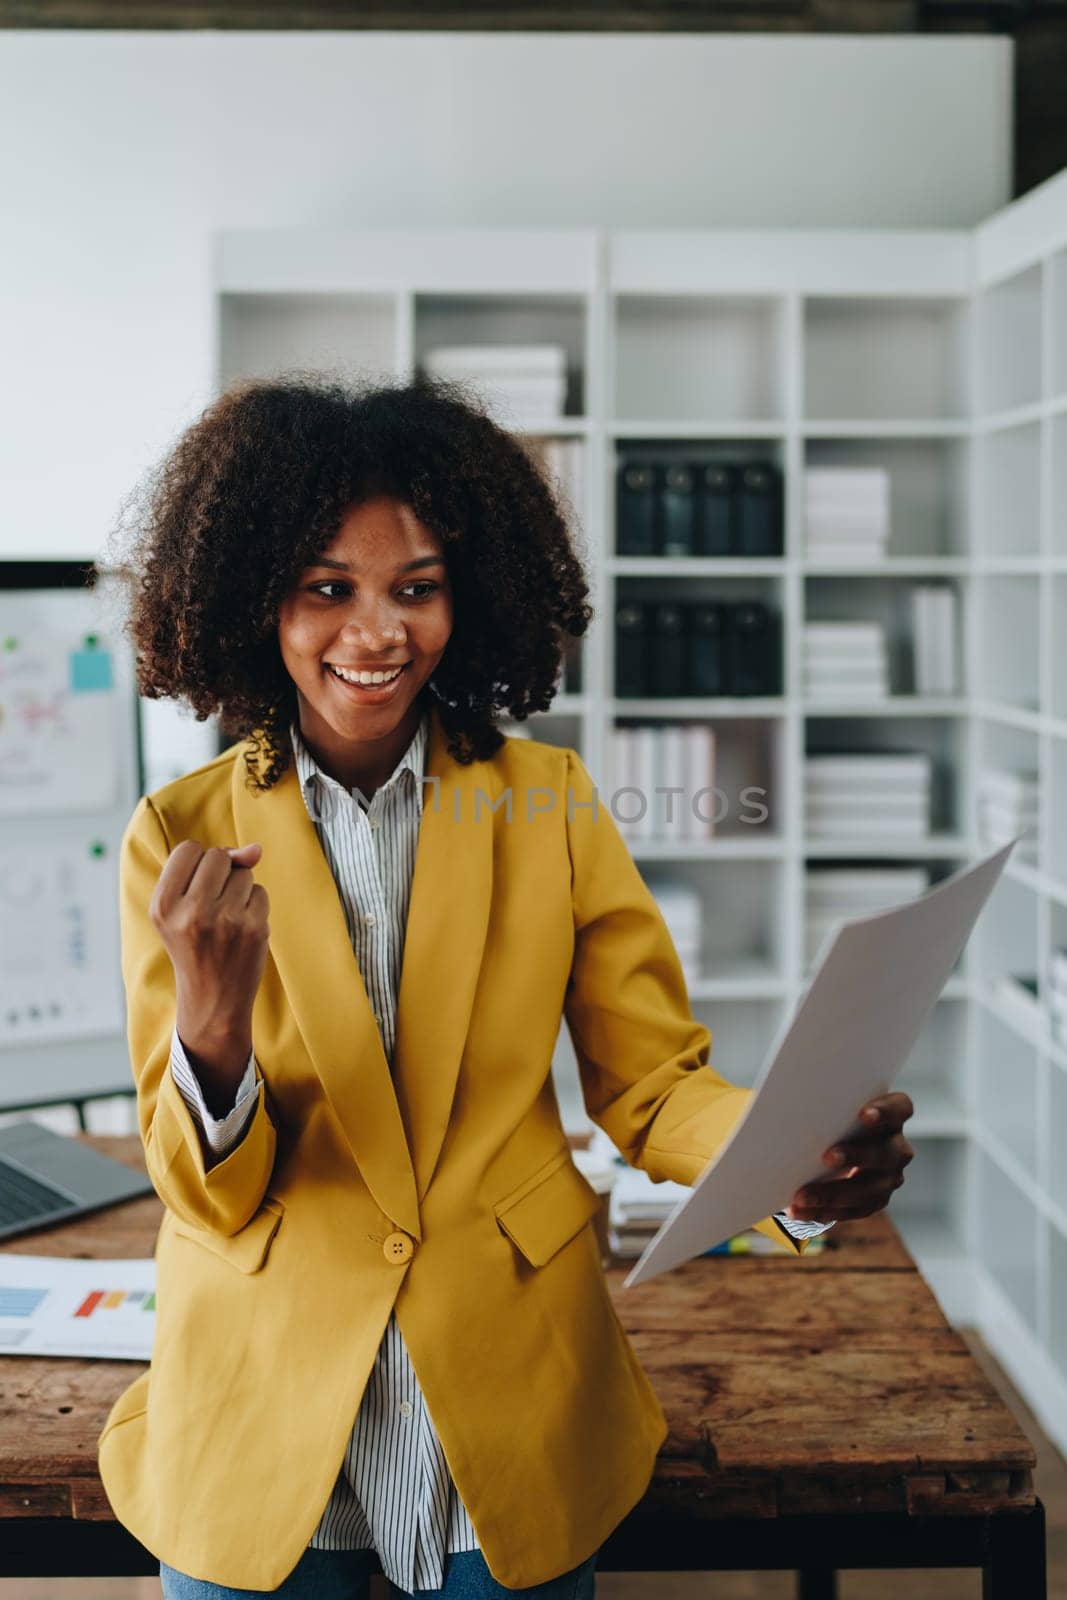 American African business woman using document, computer laptop, calculator, paperwork, documents, in winner and smiling Happy to be successful achievement success. finance and investment concepts by Manastrong